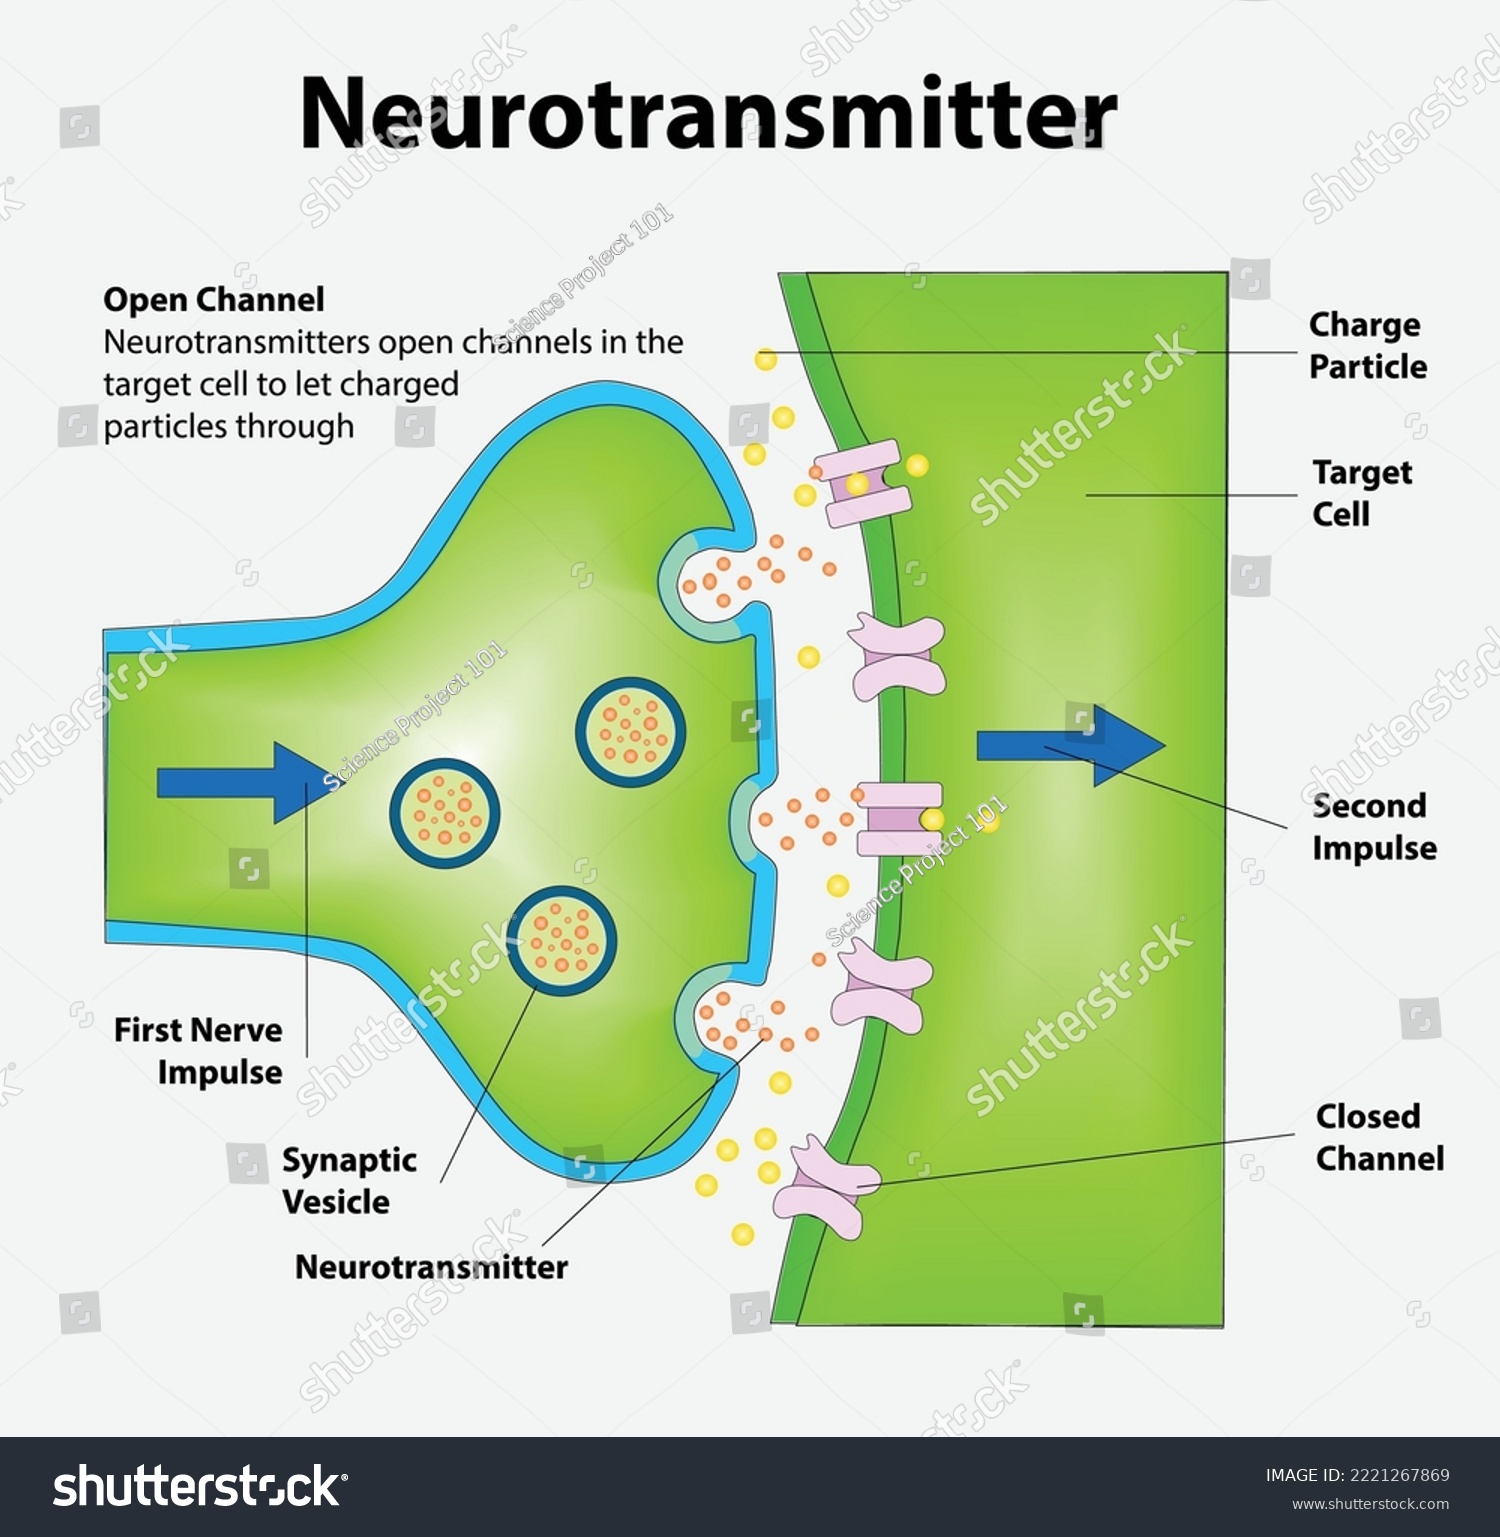 Neurotransmitters are released from synaptic vesicles of the presynaptic neuron and bind to receptors on the postsynaptic neuron, triggering an impulse through the 2nd neuron. #2221267869